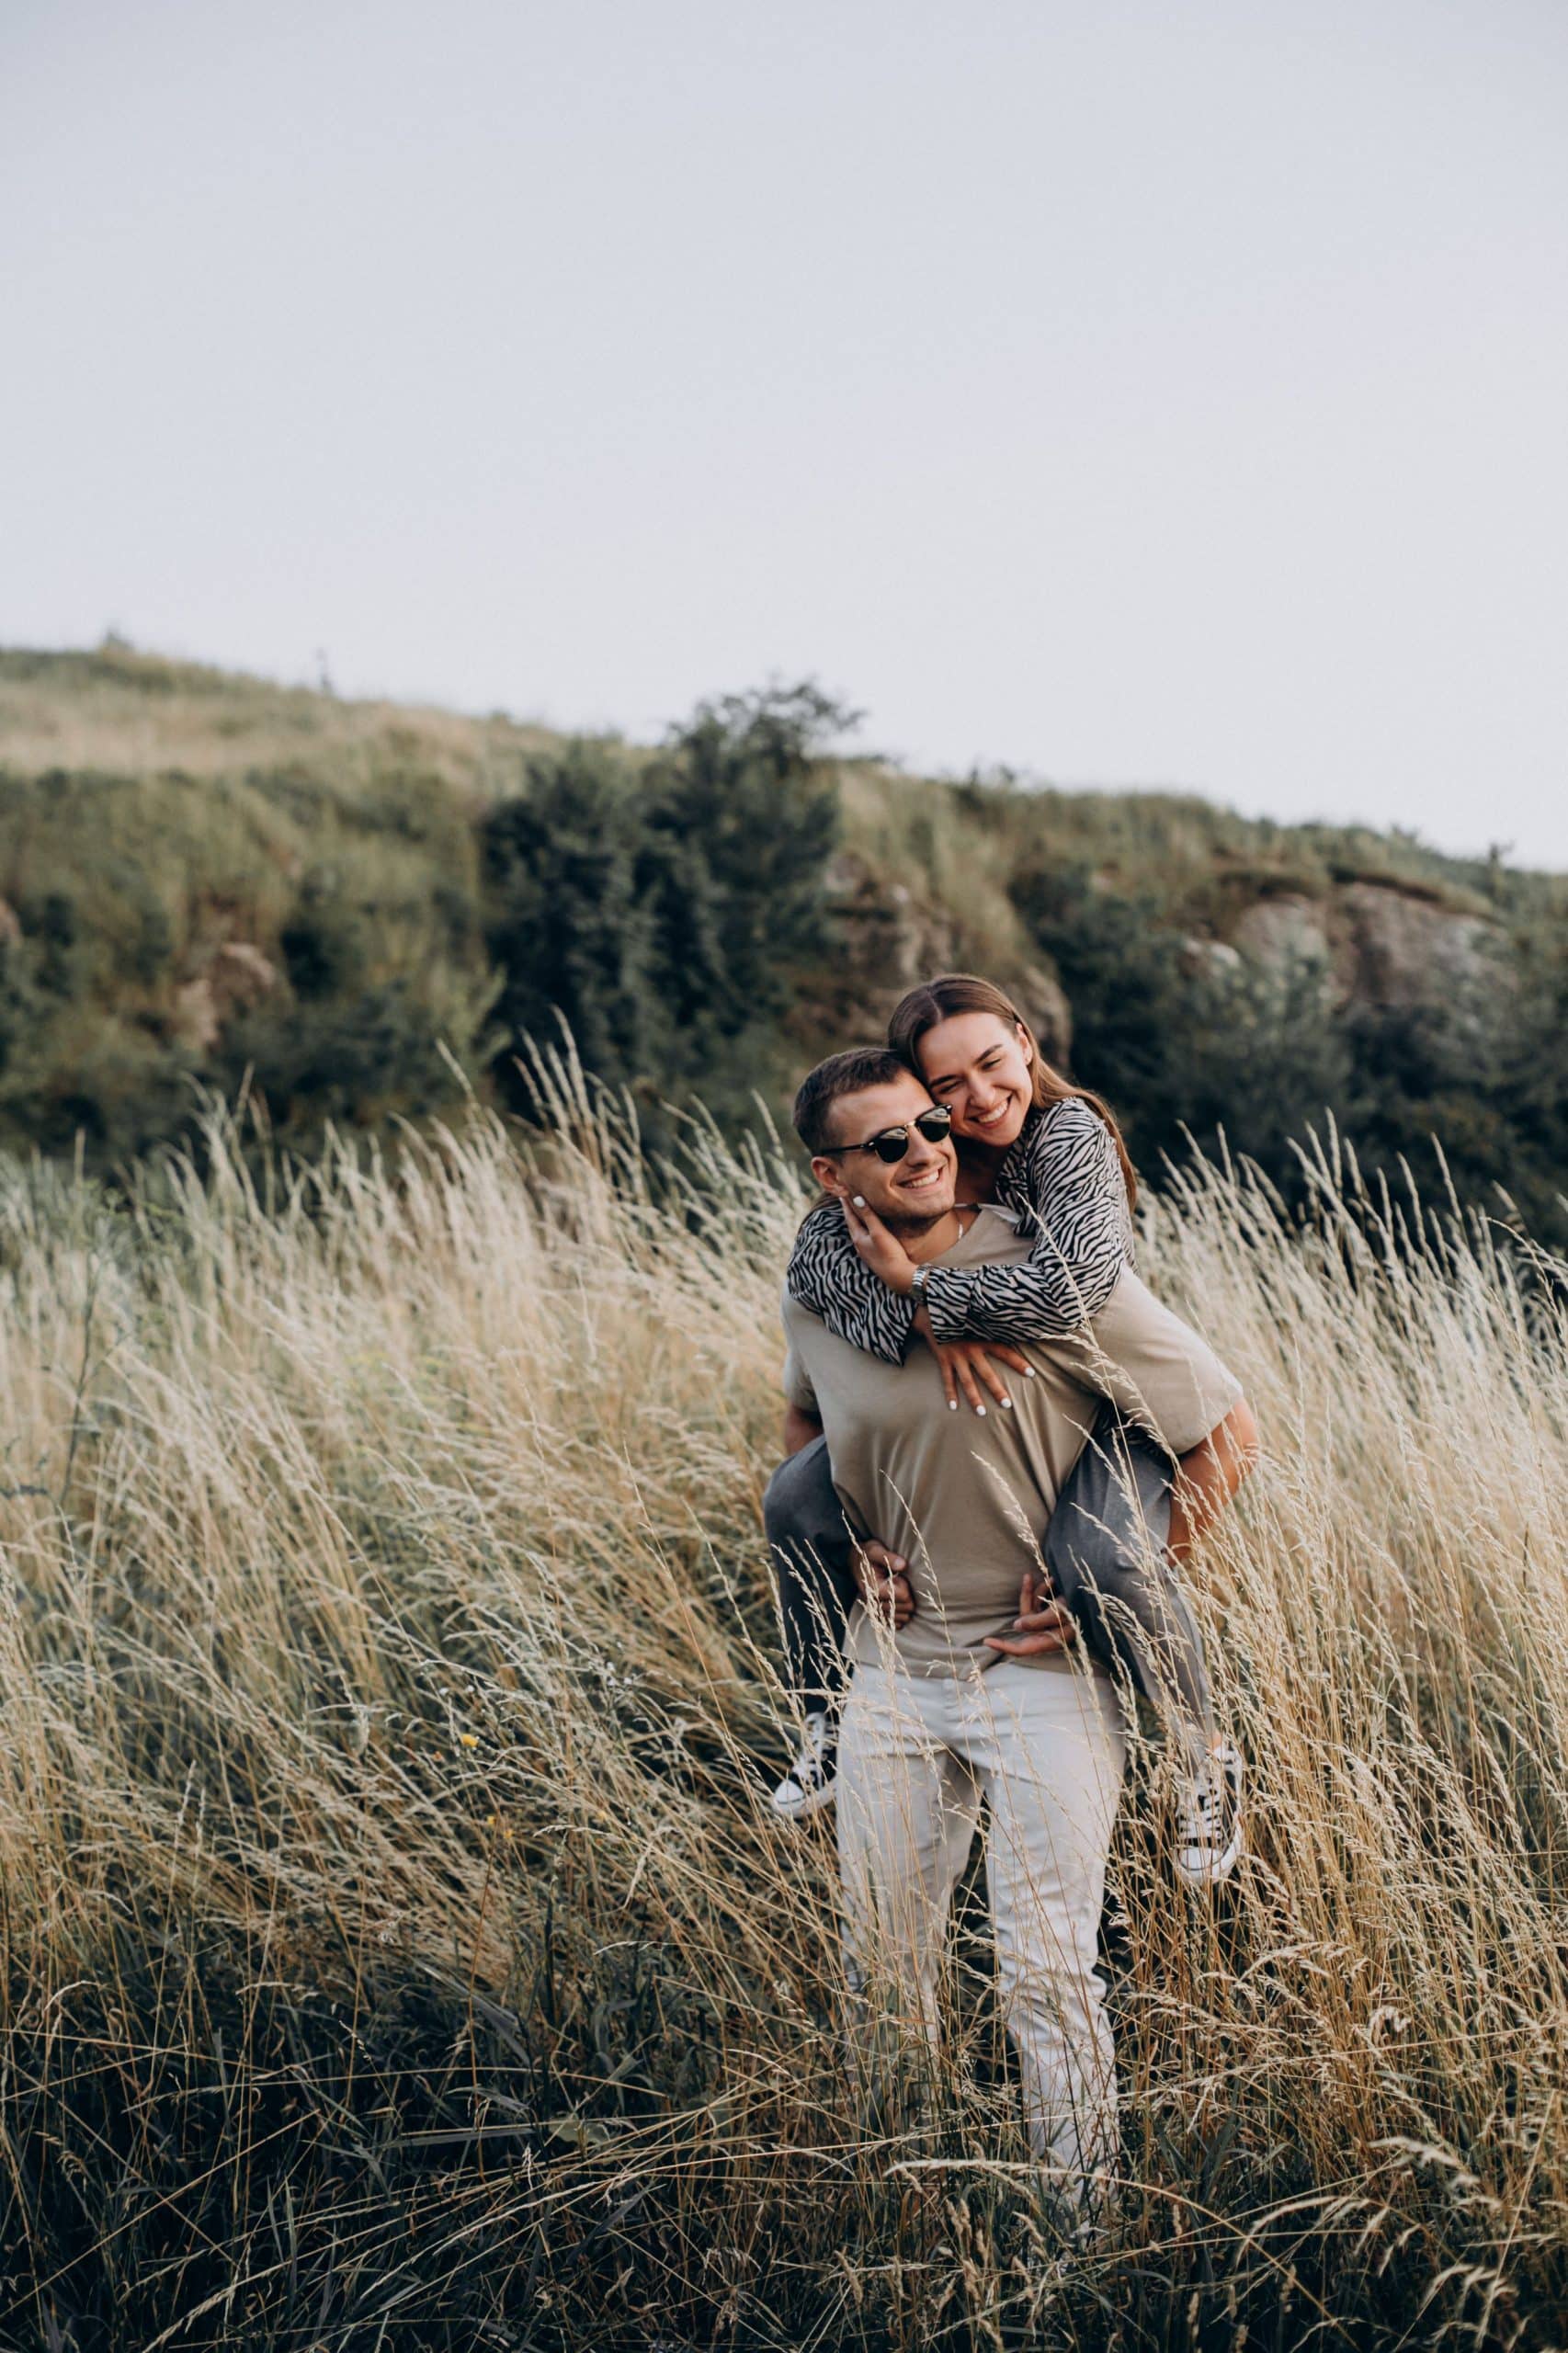 Young Couple Together in Meadow | Wellspring Counselling Inc.